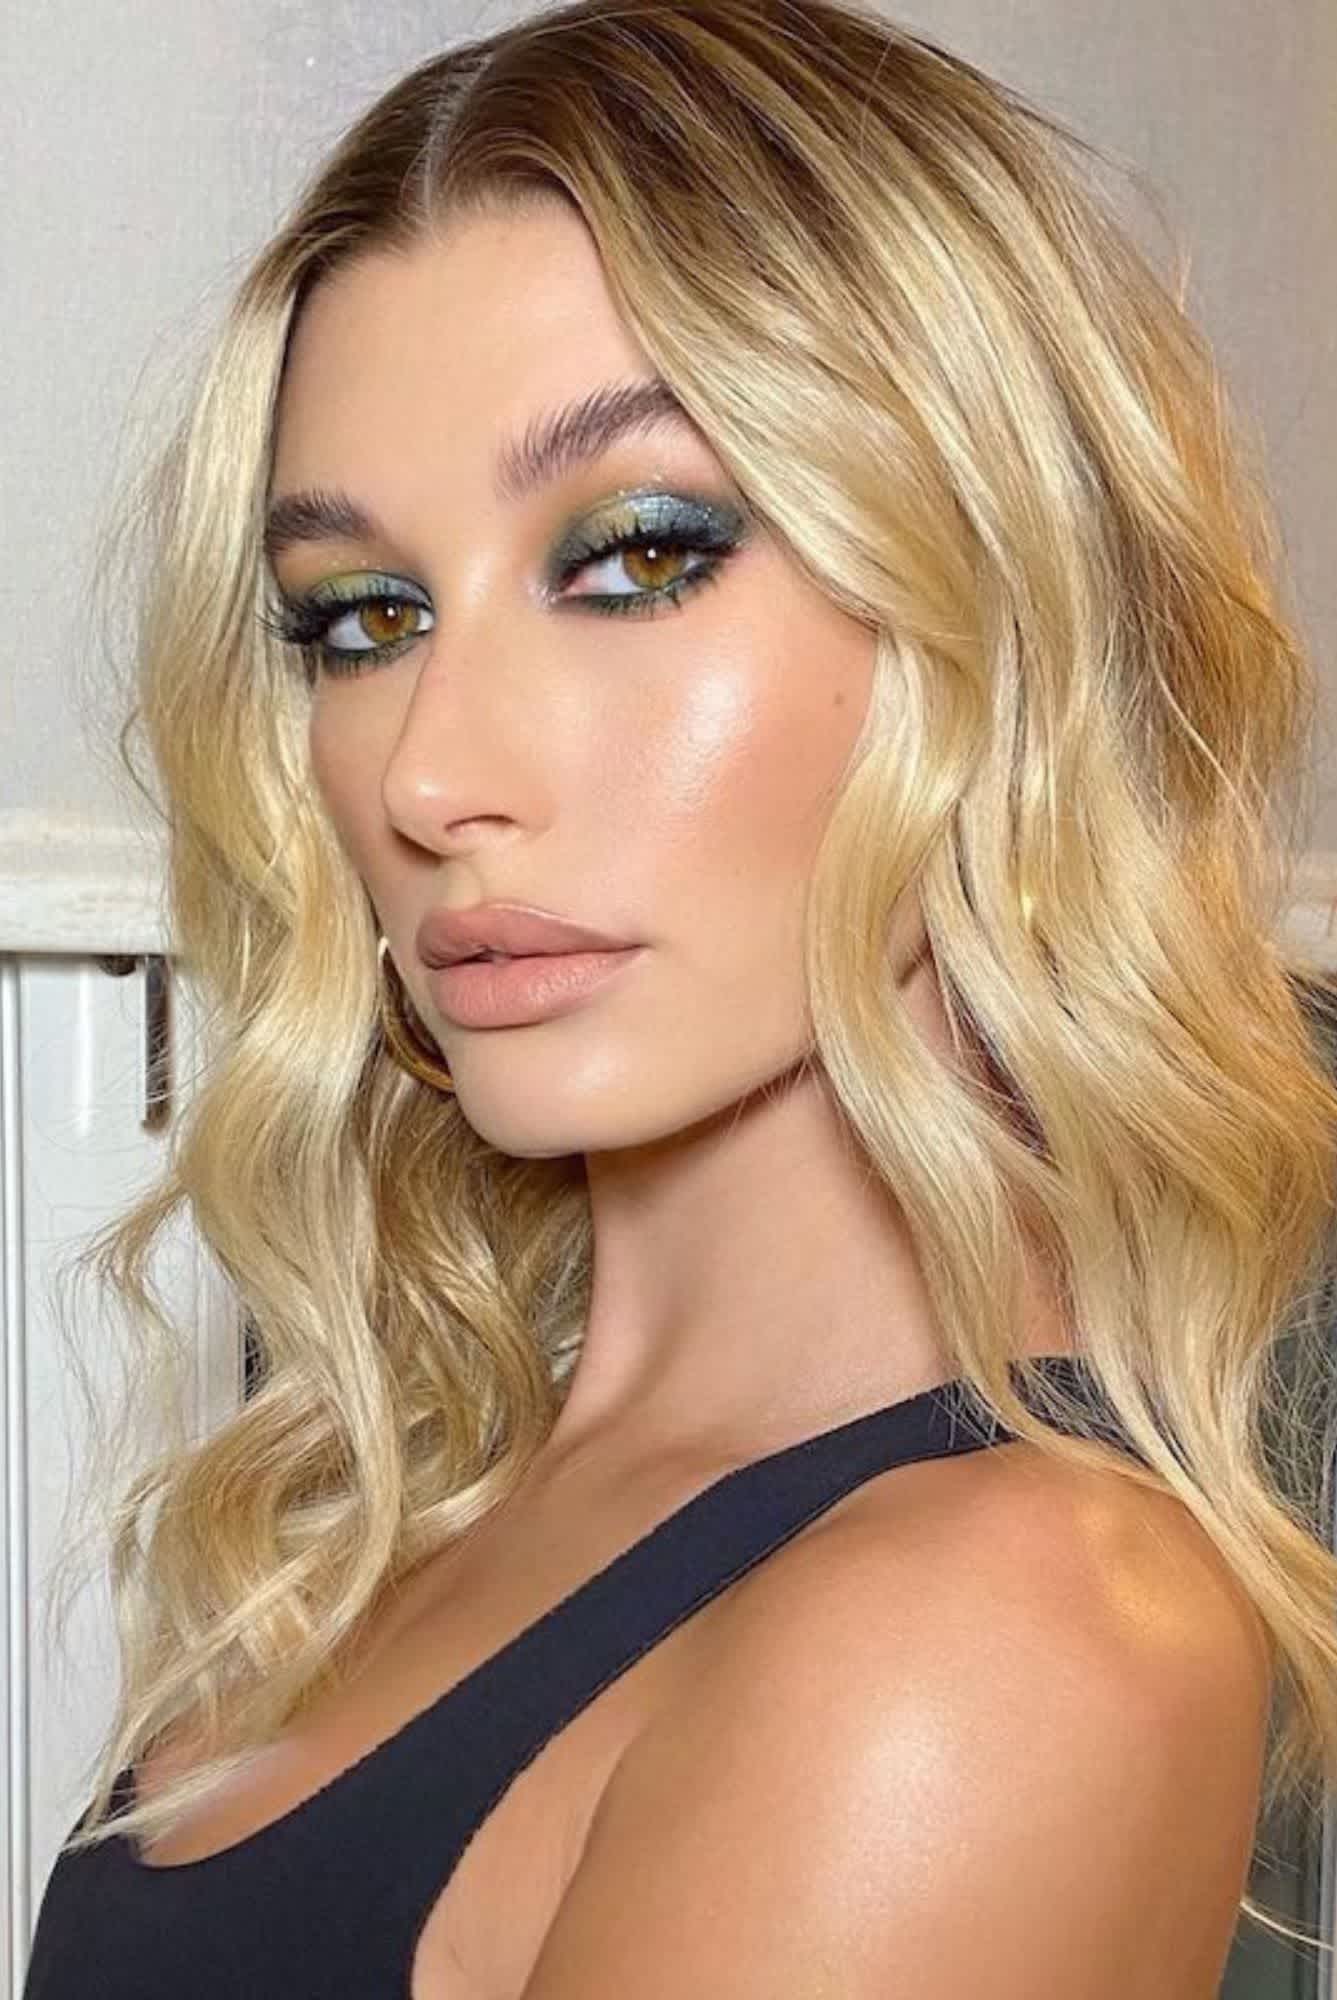 Hailey Bieber plays with varying depths of green eye makeup